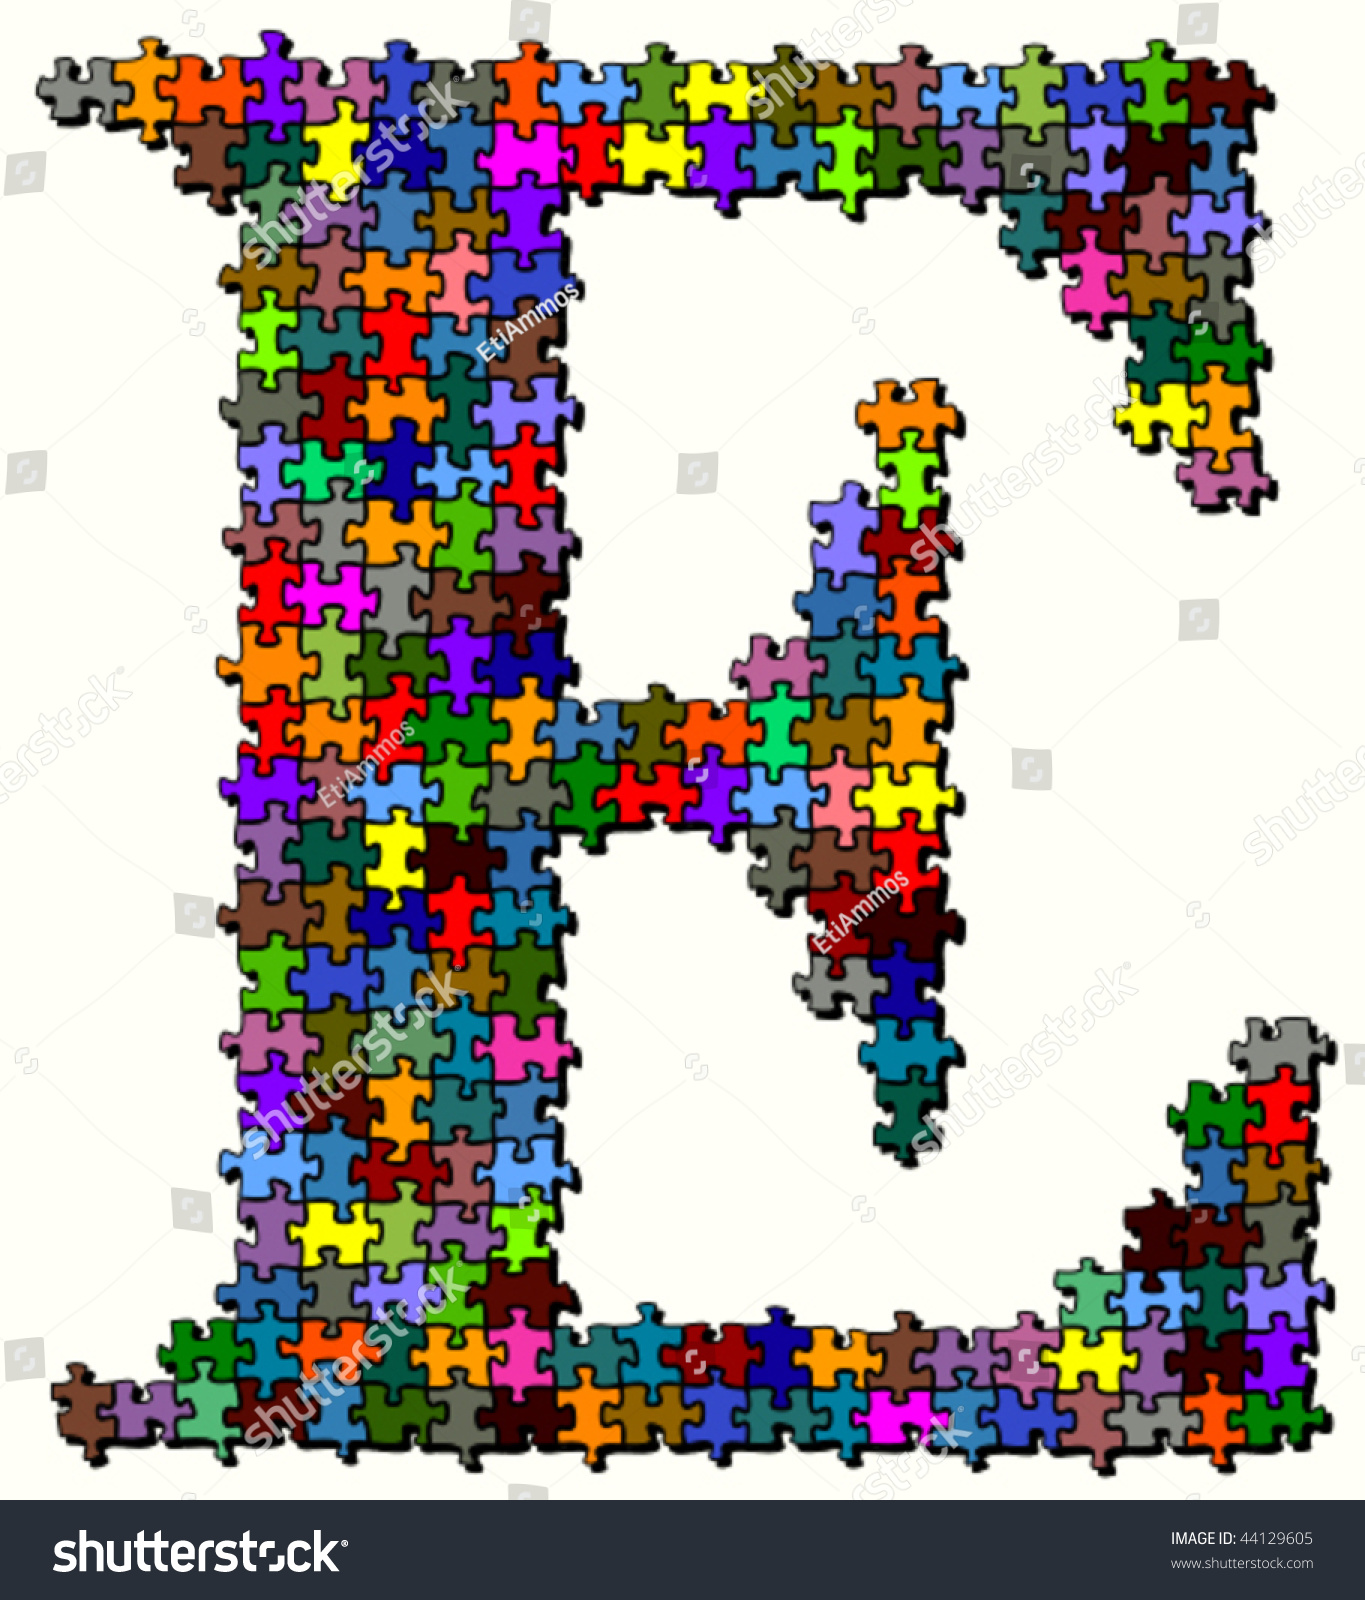 Letter Made Of Colored Puzzle Pieces - Vector Illustration - 44129605 ...